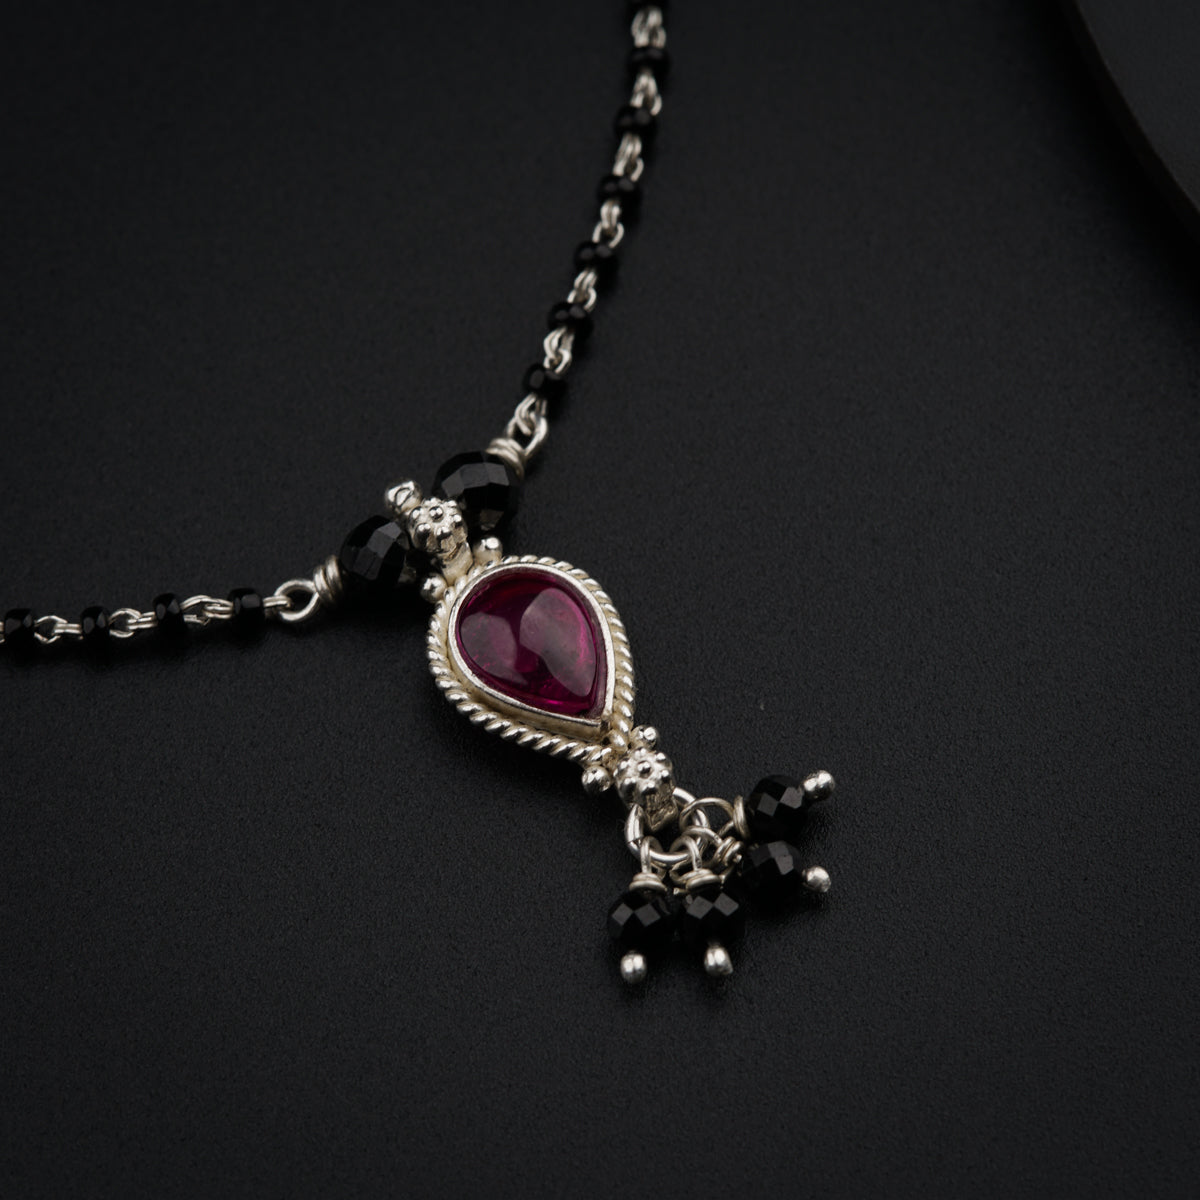 a necklace with a heart shaped pendant on a black surface